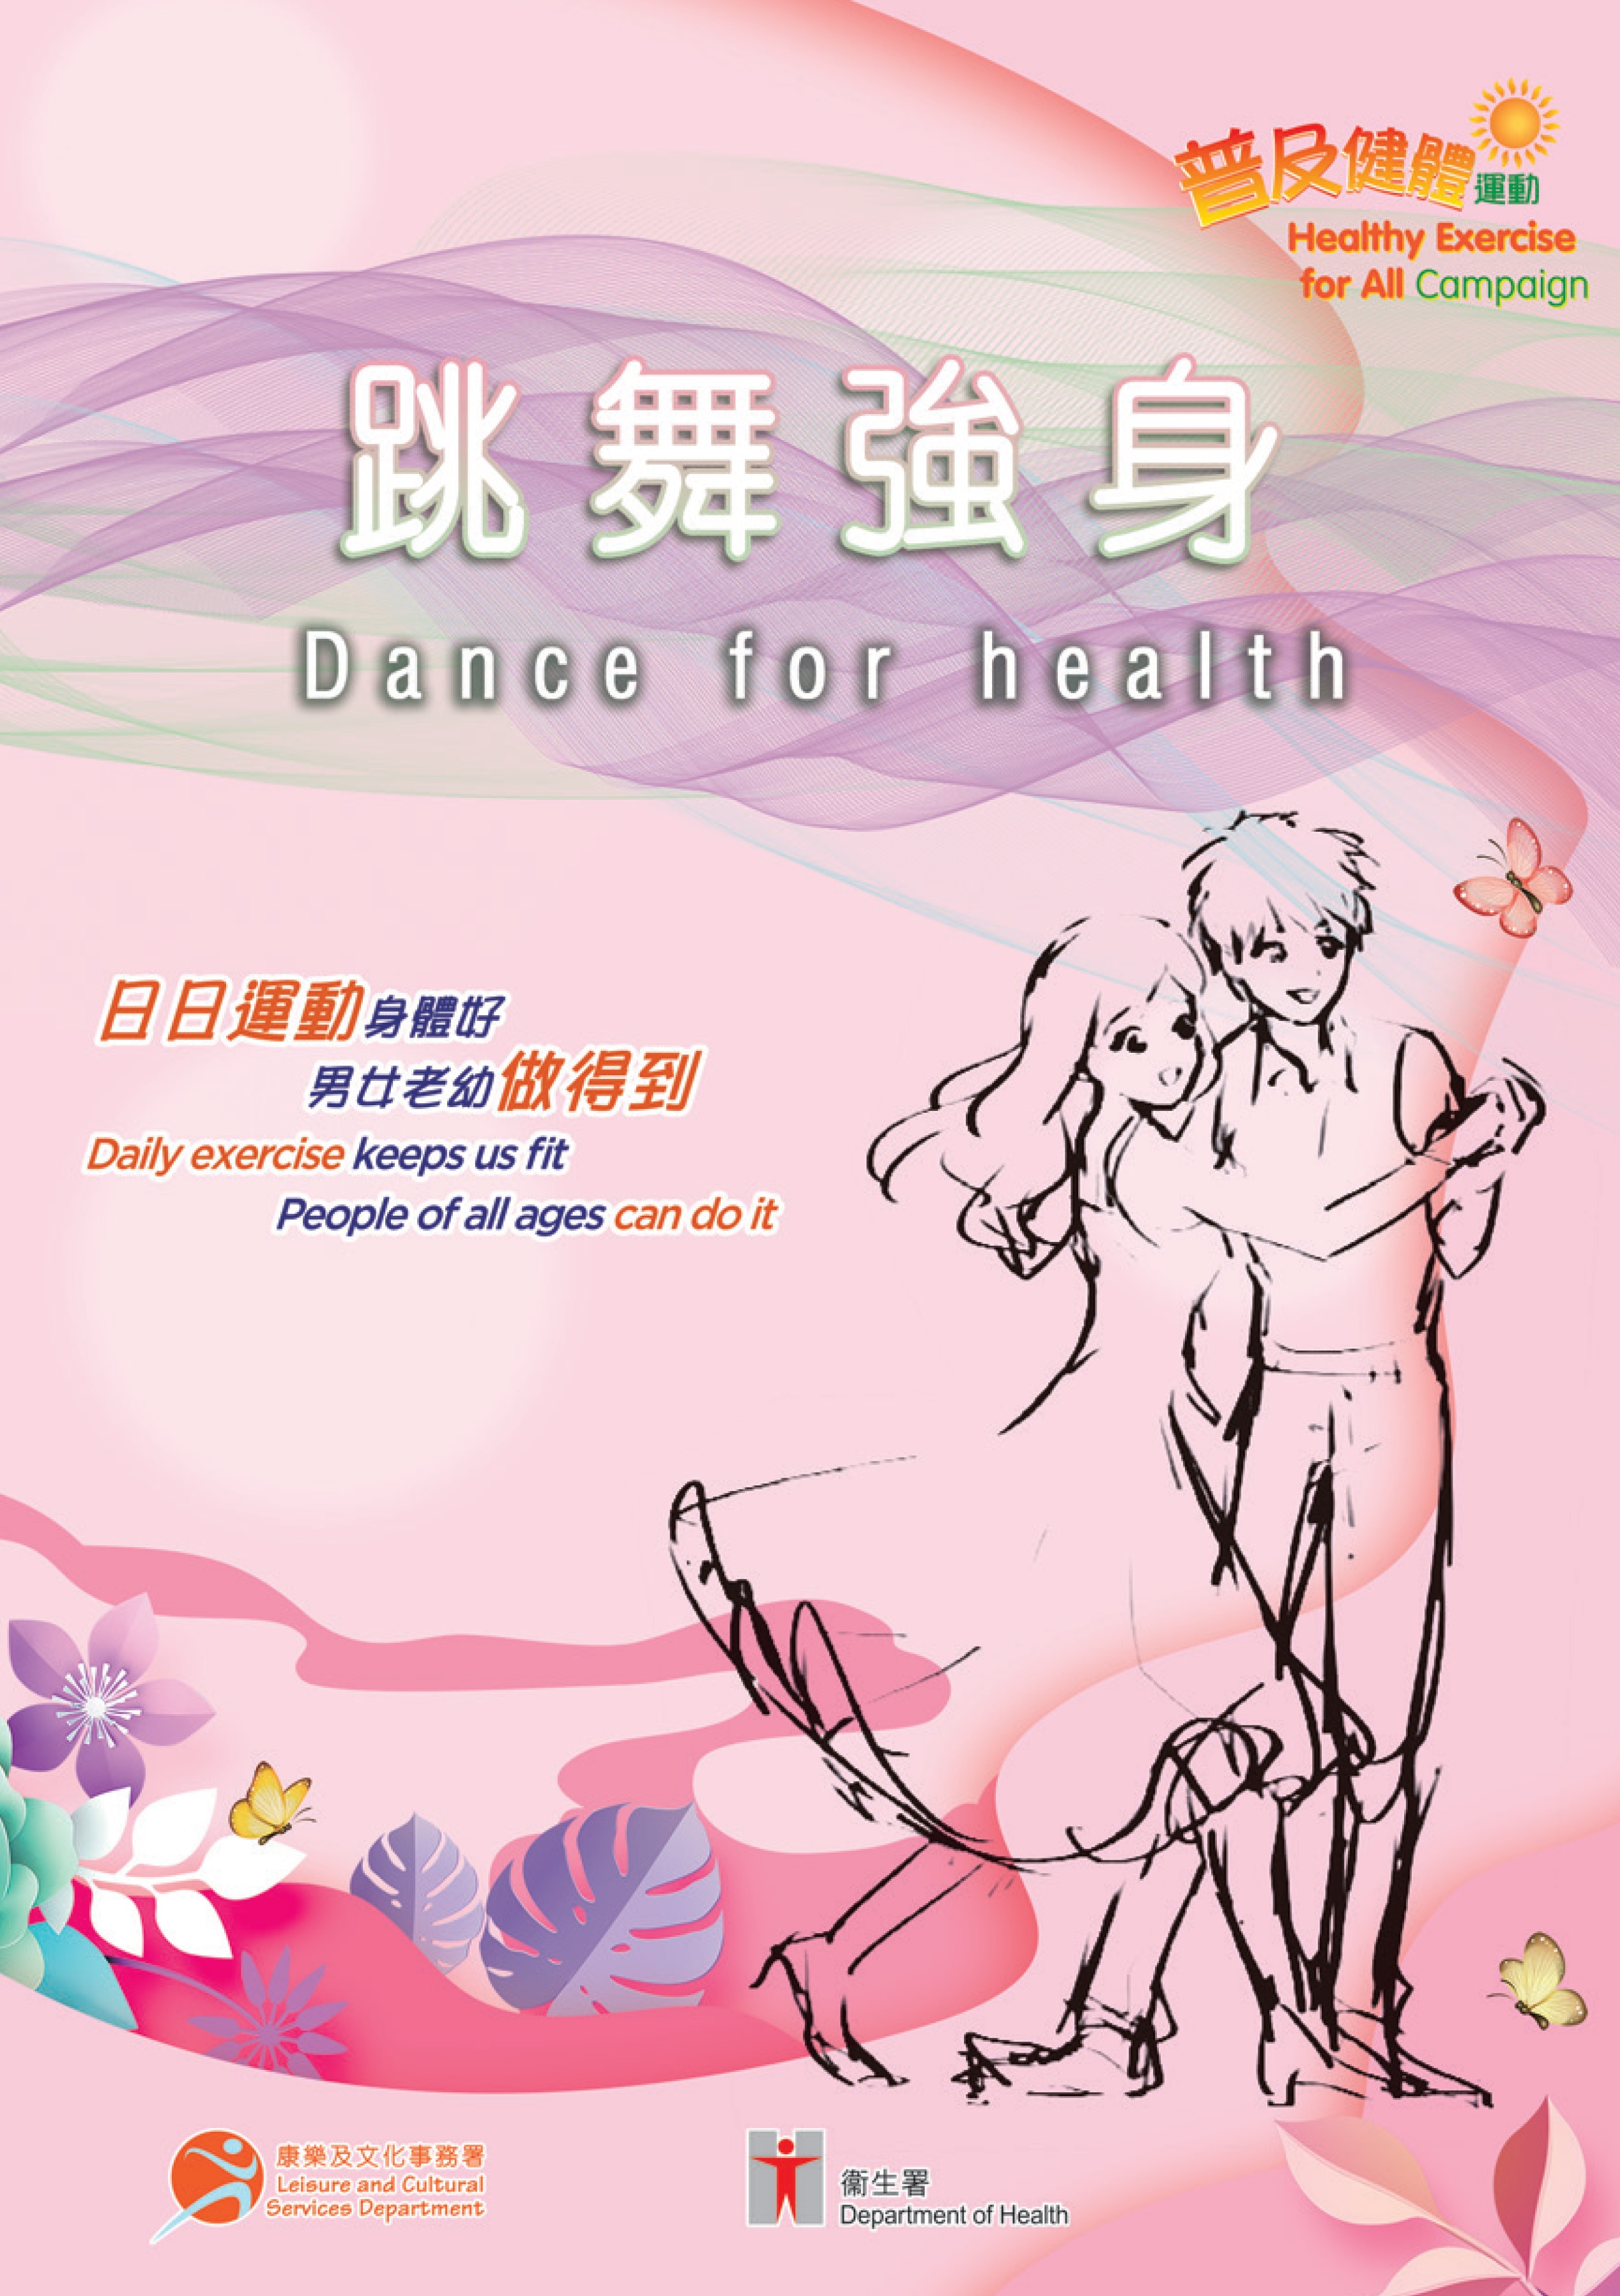 Picture: Dance for Health